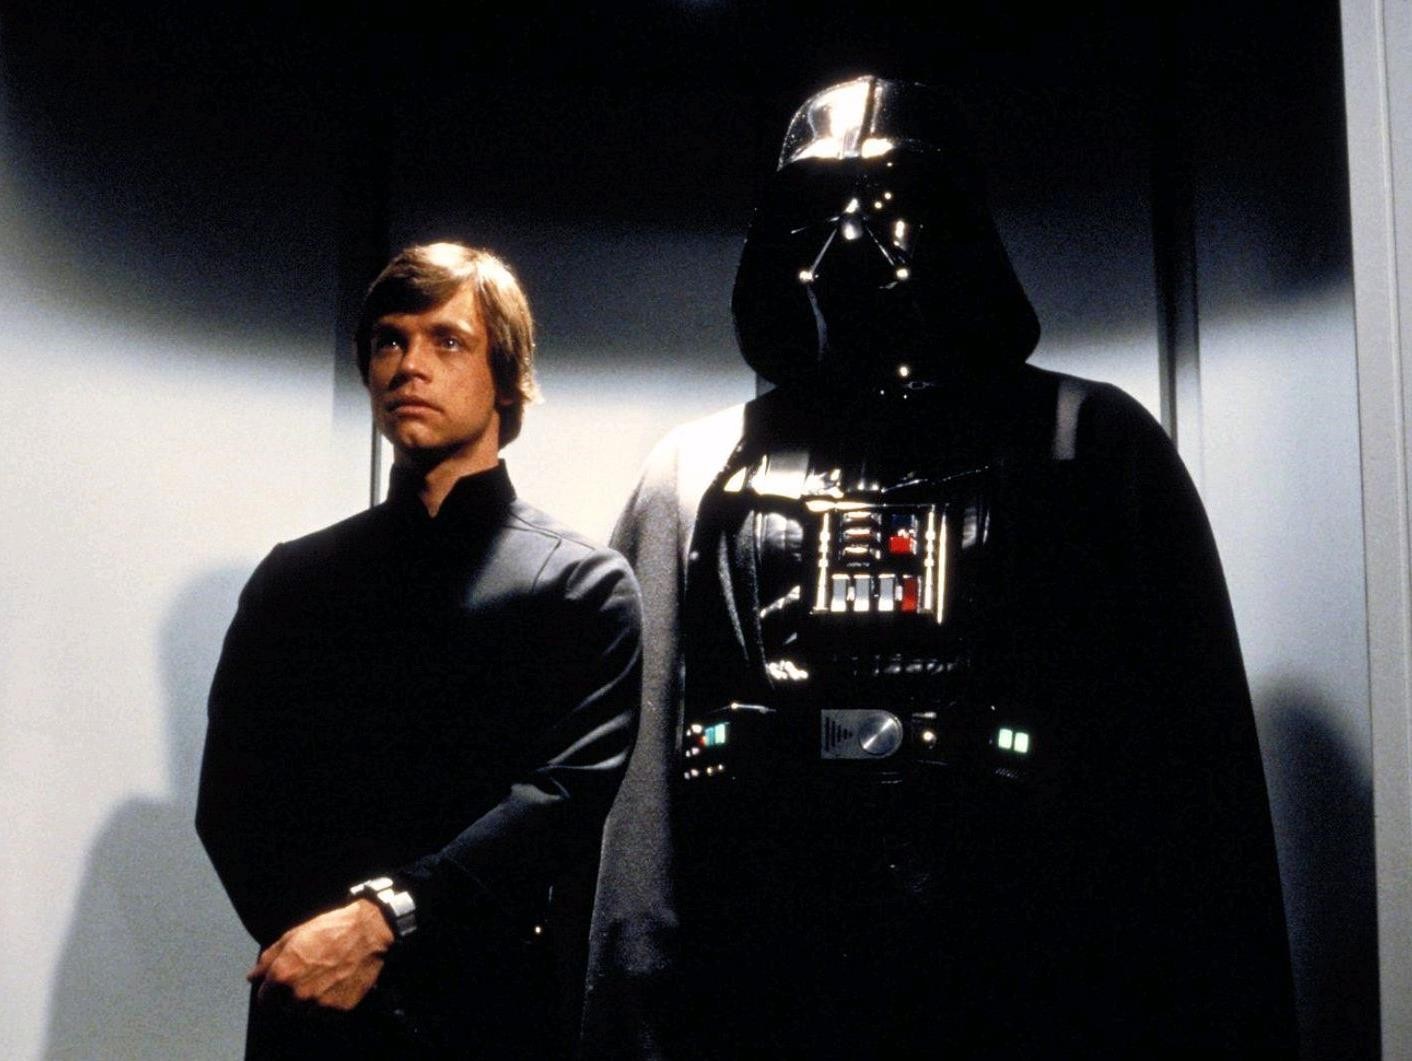 Which “Stars Wars” Trilogy Do You Belong In? Star Wars Episode VI Return Of The Jedi